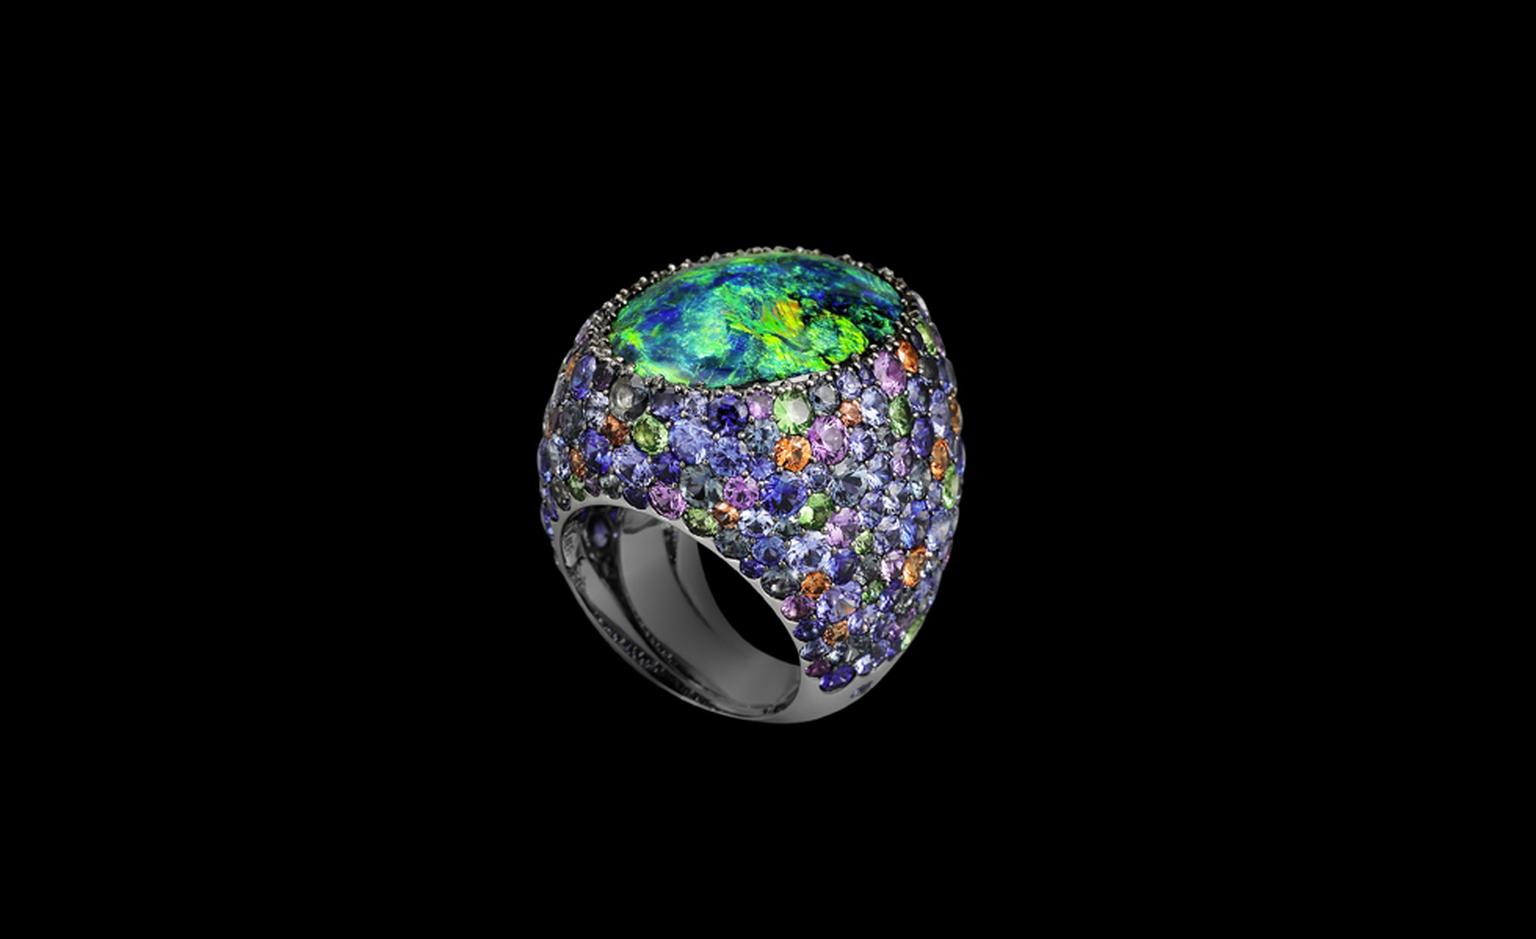 Lorenz Bäumer, Cardinal ring, black opal and saphires in white gold. €32,250